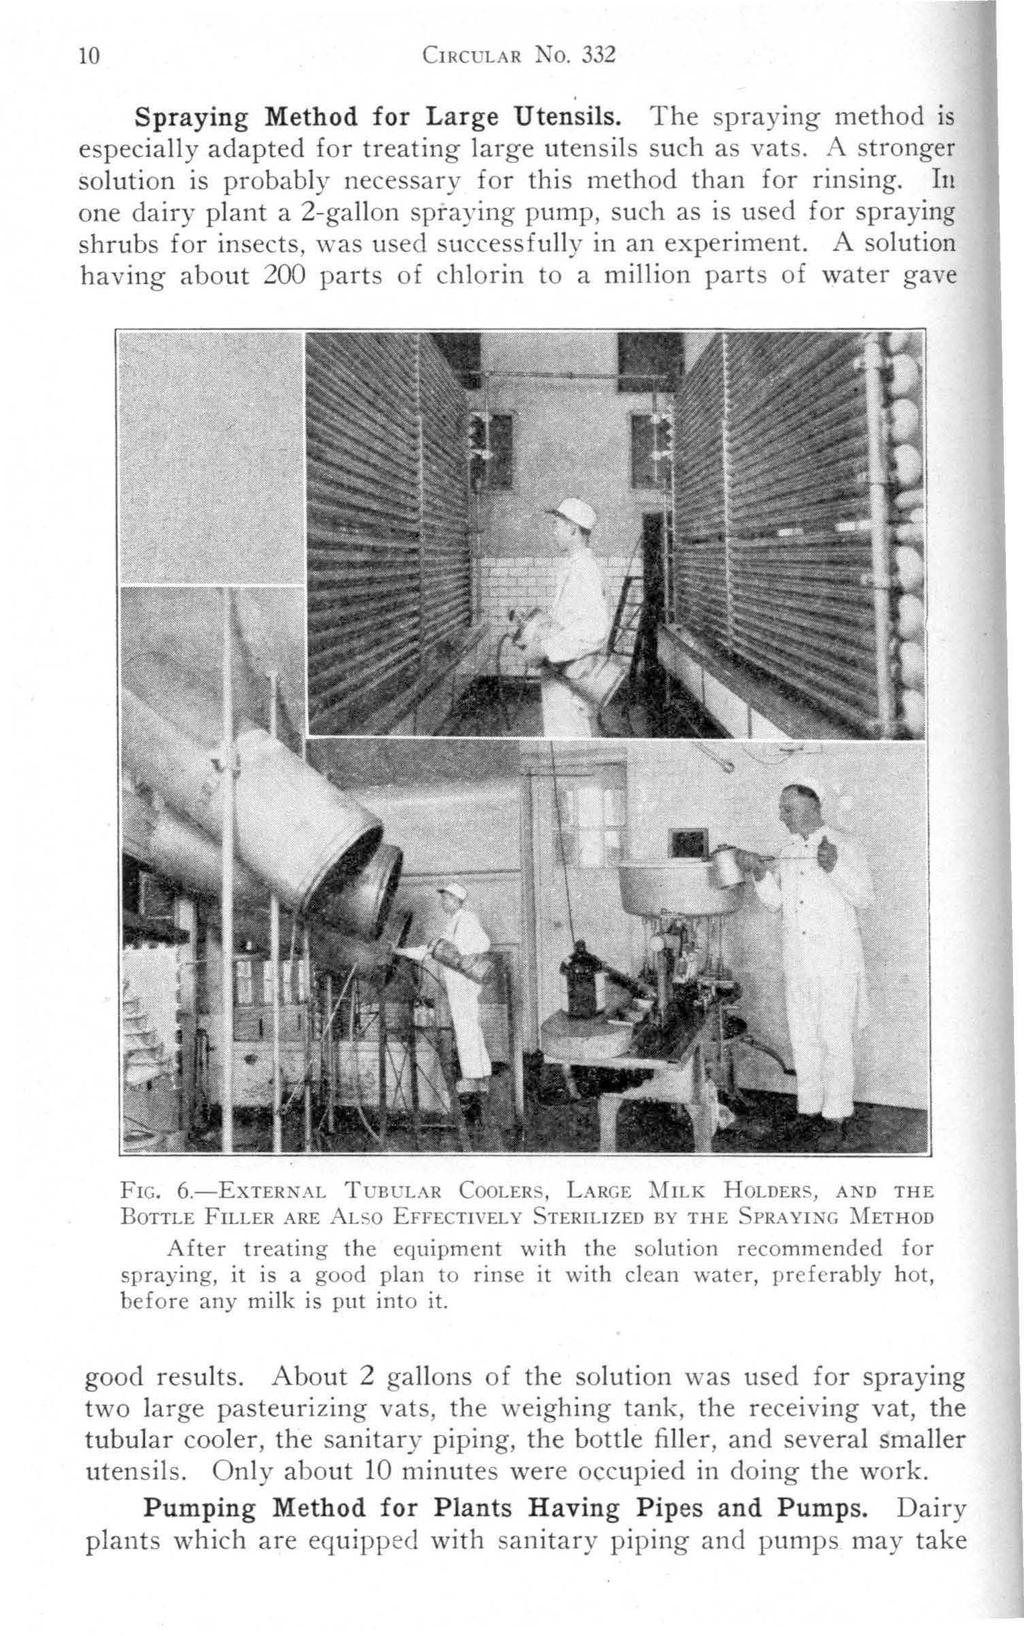 10 CIRCULAR No. 332 Spraying Method for Large Utensils. The spraying method is especially adapted for treating large utensils such as vats.